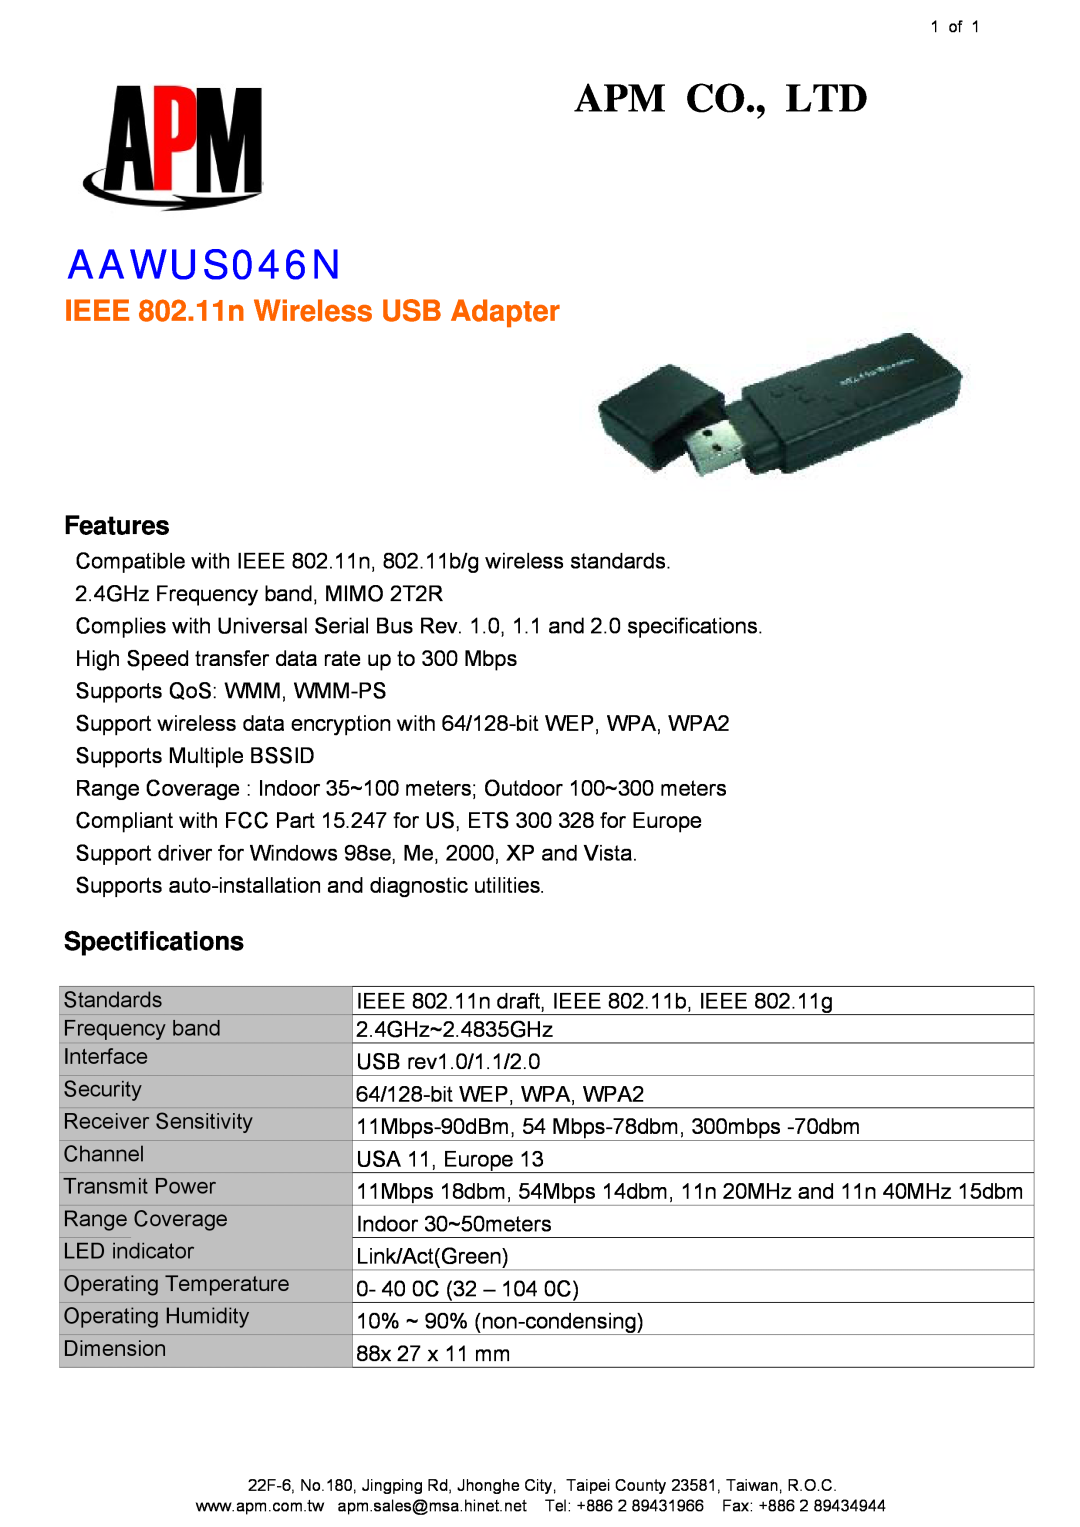 APM AAWUS046N specifications IEEE 802.11n Wireless USB Adapter, Features, Spectifications 